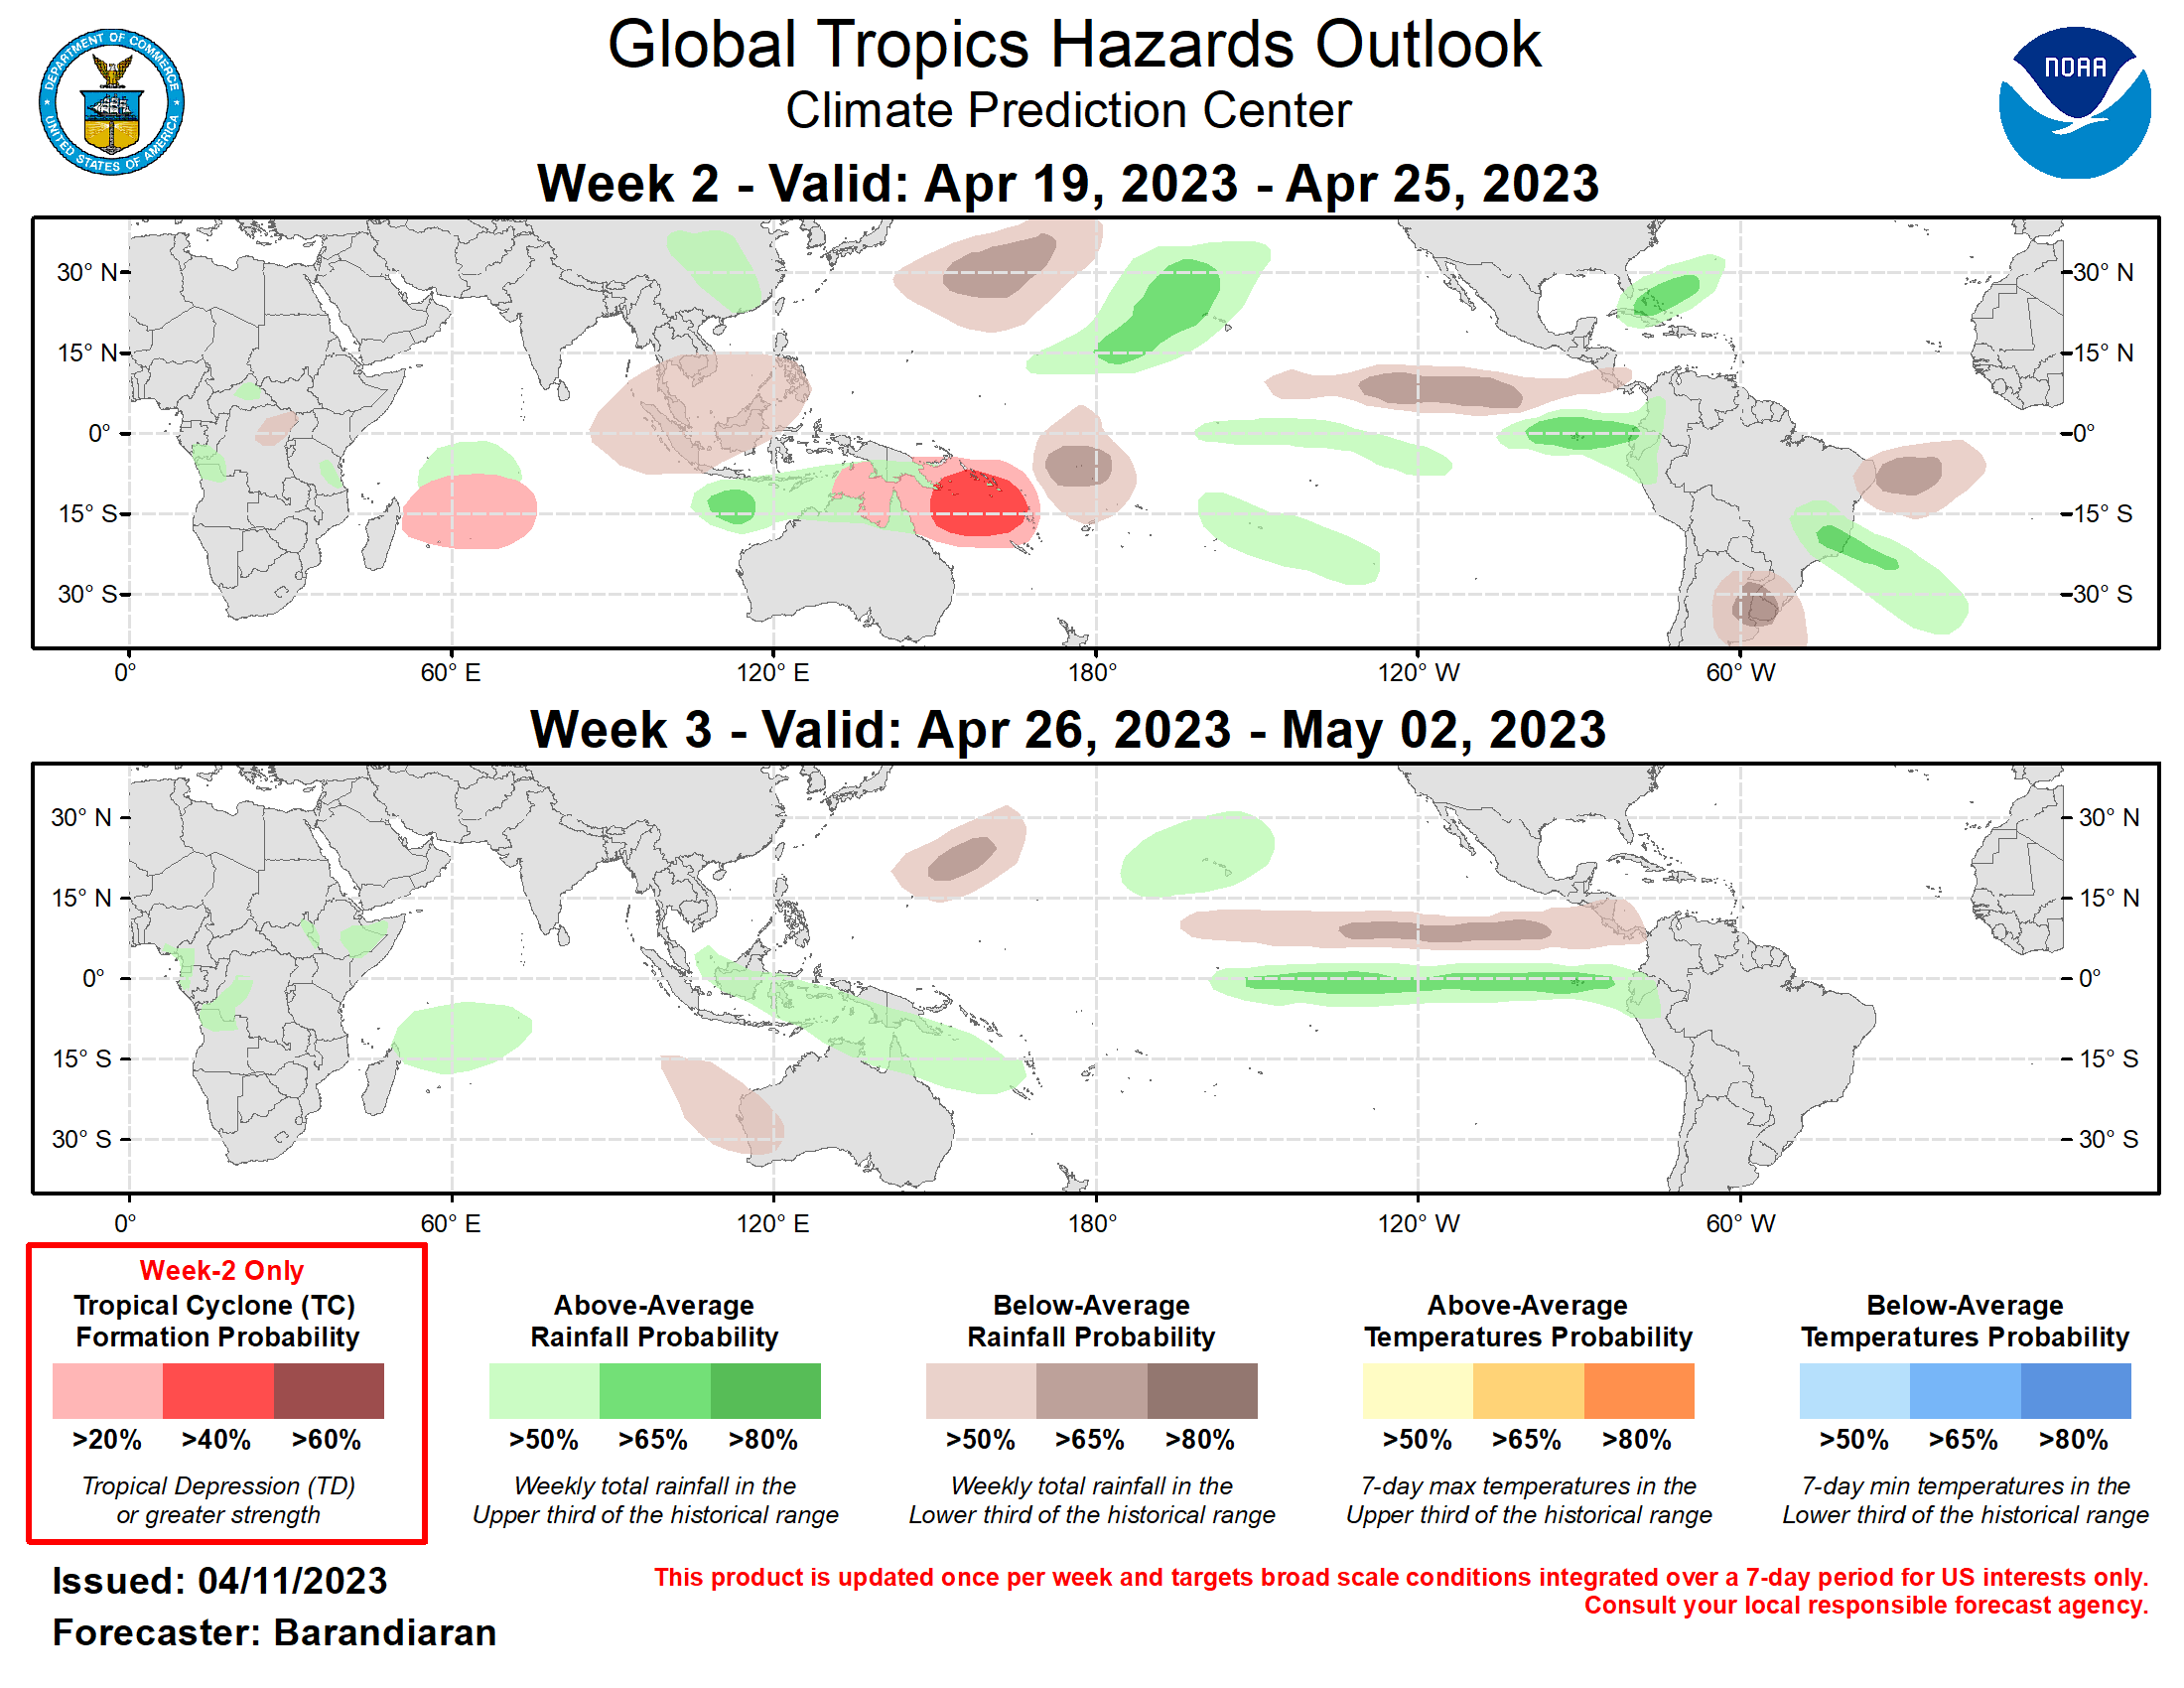 Last Updated - 04/11/23 Valid - 04/19/23 - 05/02/23 The Madden-Julian Oscillation (MJO) has been very active since early March and is now the dominant driver of variability in the tropics as any residual influence from the long-lived La Nina base state fades. The RMM index is currently near the phase 6-7 boundary (Western Pacific), and model guidance generally favors a continued eastward propagation of the MJO signal through the week-3 period, although there is considerable disagreement as to the strength of the convective envelope and the speed at which it propagates. Warming of sea surface temperatures in the Tropical Pacific continues with all Nino regions above average, especially Nino 1+2, which is 2.7 C above average.  There has been a slight uptick in tropical cyclone (TC) activity in the last week, with TC Ilsa that formed off the northwest coast of Australia, and an area east of the Philippines currently being monitored by the Joint Typhoon Warning Center, which is favored to spawn another TC in the near future. TC Ilsa is forecast to track southwestward into the northeast Australian coast, increasing in intensity as it does so. For more details on TC Ilsa, please consult your local meteorological agency.  Despite model solutions depicting MJO propagation into the Western Hemisphere during week-2 which would generally be unfavorable to TC formation for the Australia region, guidance from the GEFS and ECMWF favor a continued enhanced chance for TC formation for this region, particularly over the Coral Sea. Ensemble solutions also favor enhanced chances for TC genesis for the southwestern Indian Ocean as the suppressed phase of the MJO moves out of the region.  The precipitation outlook for the next two weeks is based on anticipated TC tracks, the anticipated state of the MJO, and consensus of GEFS, CFS, and ECMWF ensemble mean solutions. Below-normal precipitation is indicated for portions of Southeast Asia and the western Maritime Continent during week-2, while above-normal precipitation is favored for the eastern Maritime Continent for both weeks. Enhanced precipitation continues for both weeks for the Hawaii region, particularly for week-2. Above-normal precipitation is also likely for the Equatorial Eastern Pacific and the coasts of Ecuador and Peru for both weeks, which will likely exacerbate flooding and landslides already affecting the region.